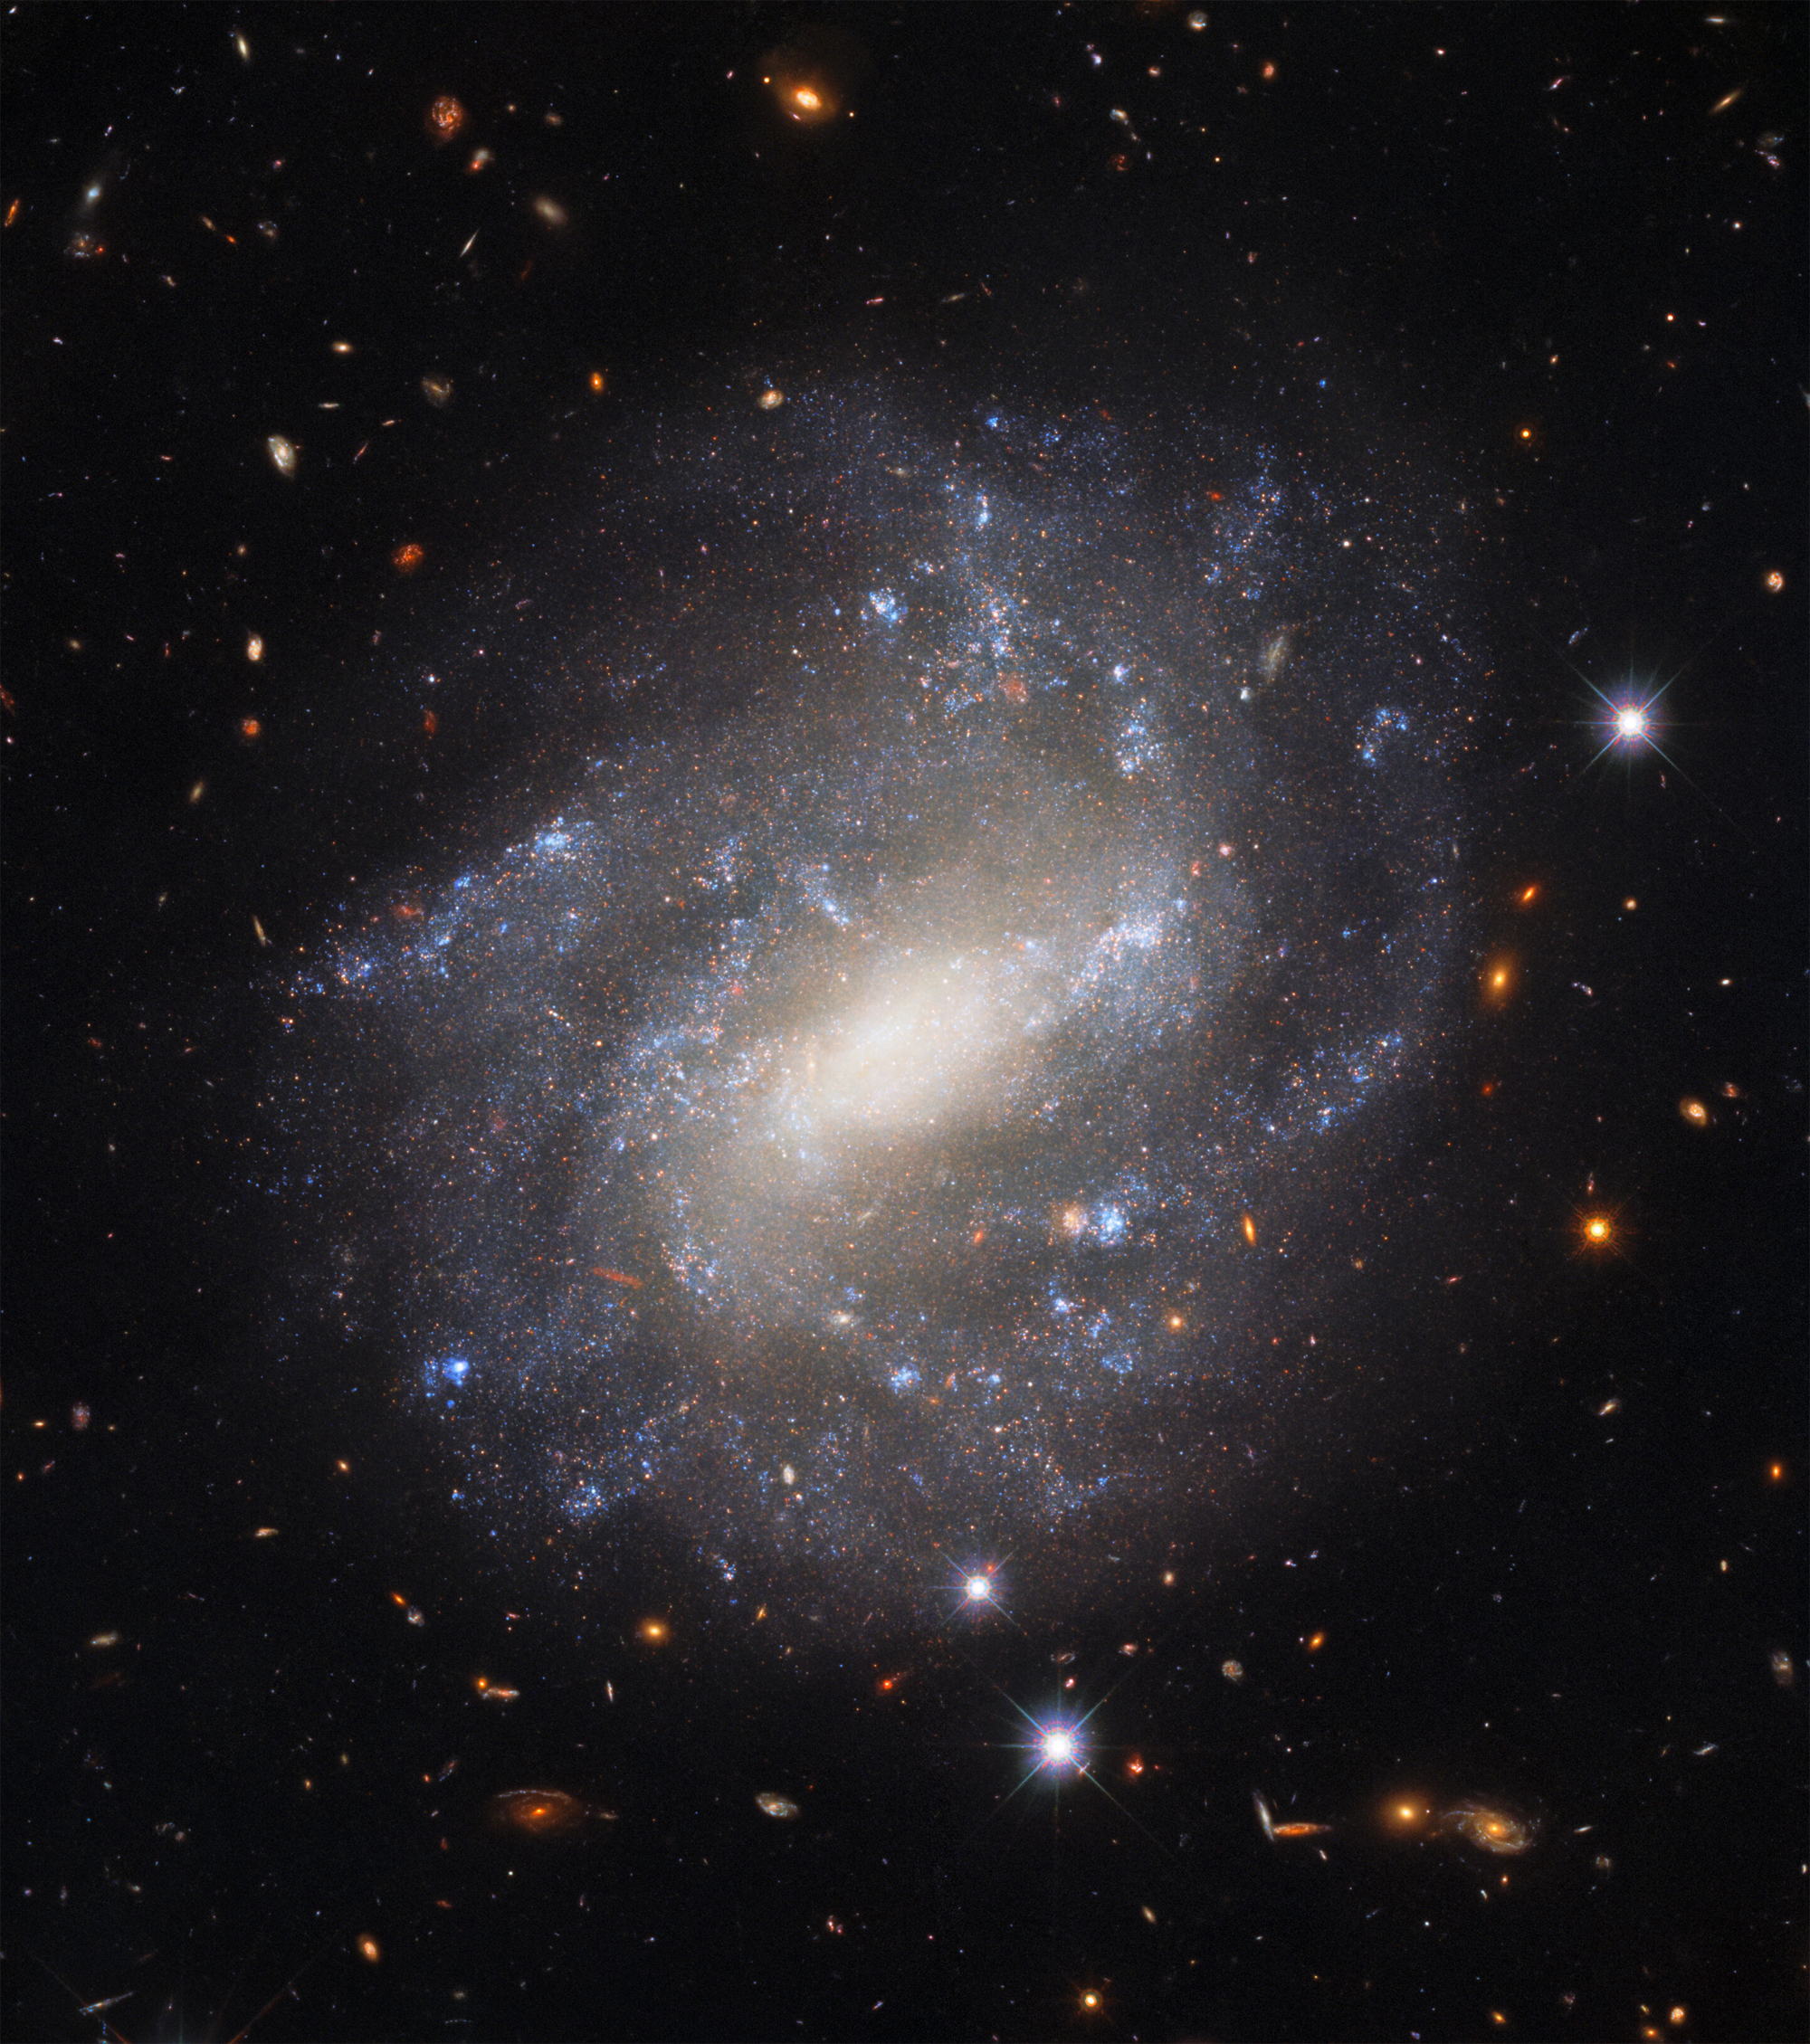 The spiral galaxy UGC 9391130 million light-years from Earth is seen by the Hubble Space Telescope's Wide Field Camera 3 in this image released Sept. 30, 2022.